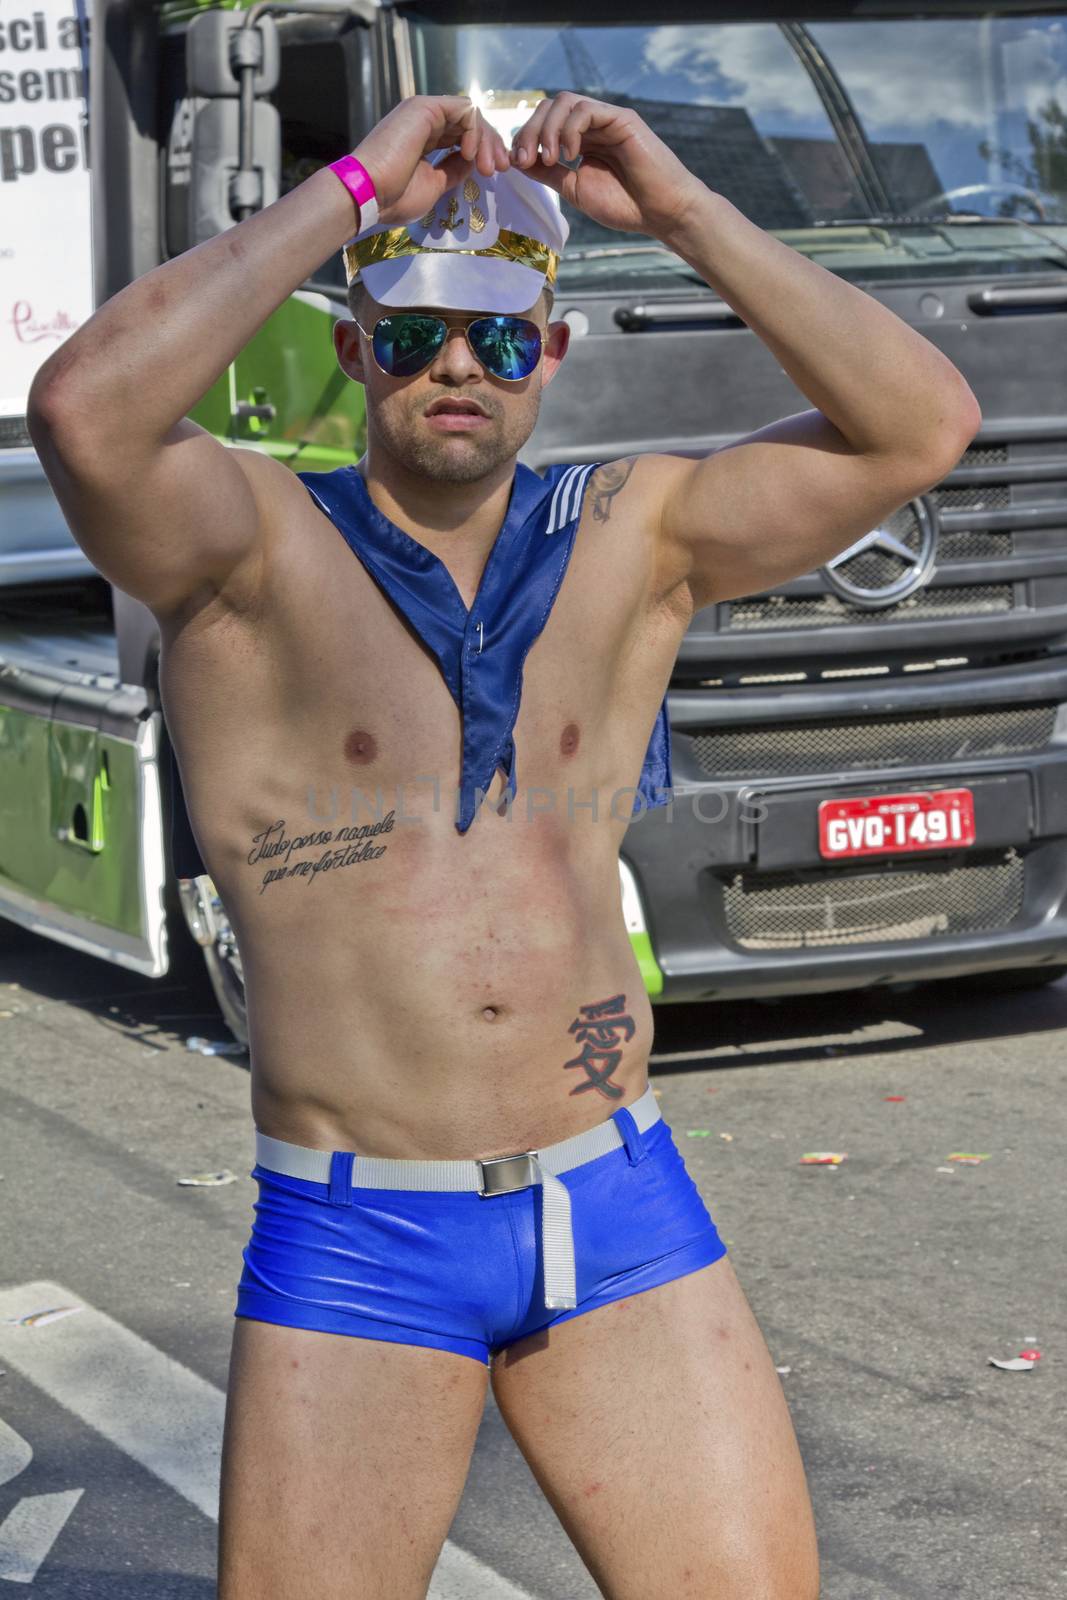 SAO PAULO, BRAZIL - June 7, 2015: An unidentified man  wearing costume and celebrating lesbian, gay, bisexual, and transgender culture in the 19º Pride Parade Sao Paulo.